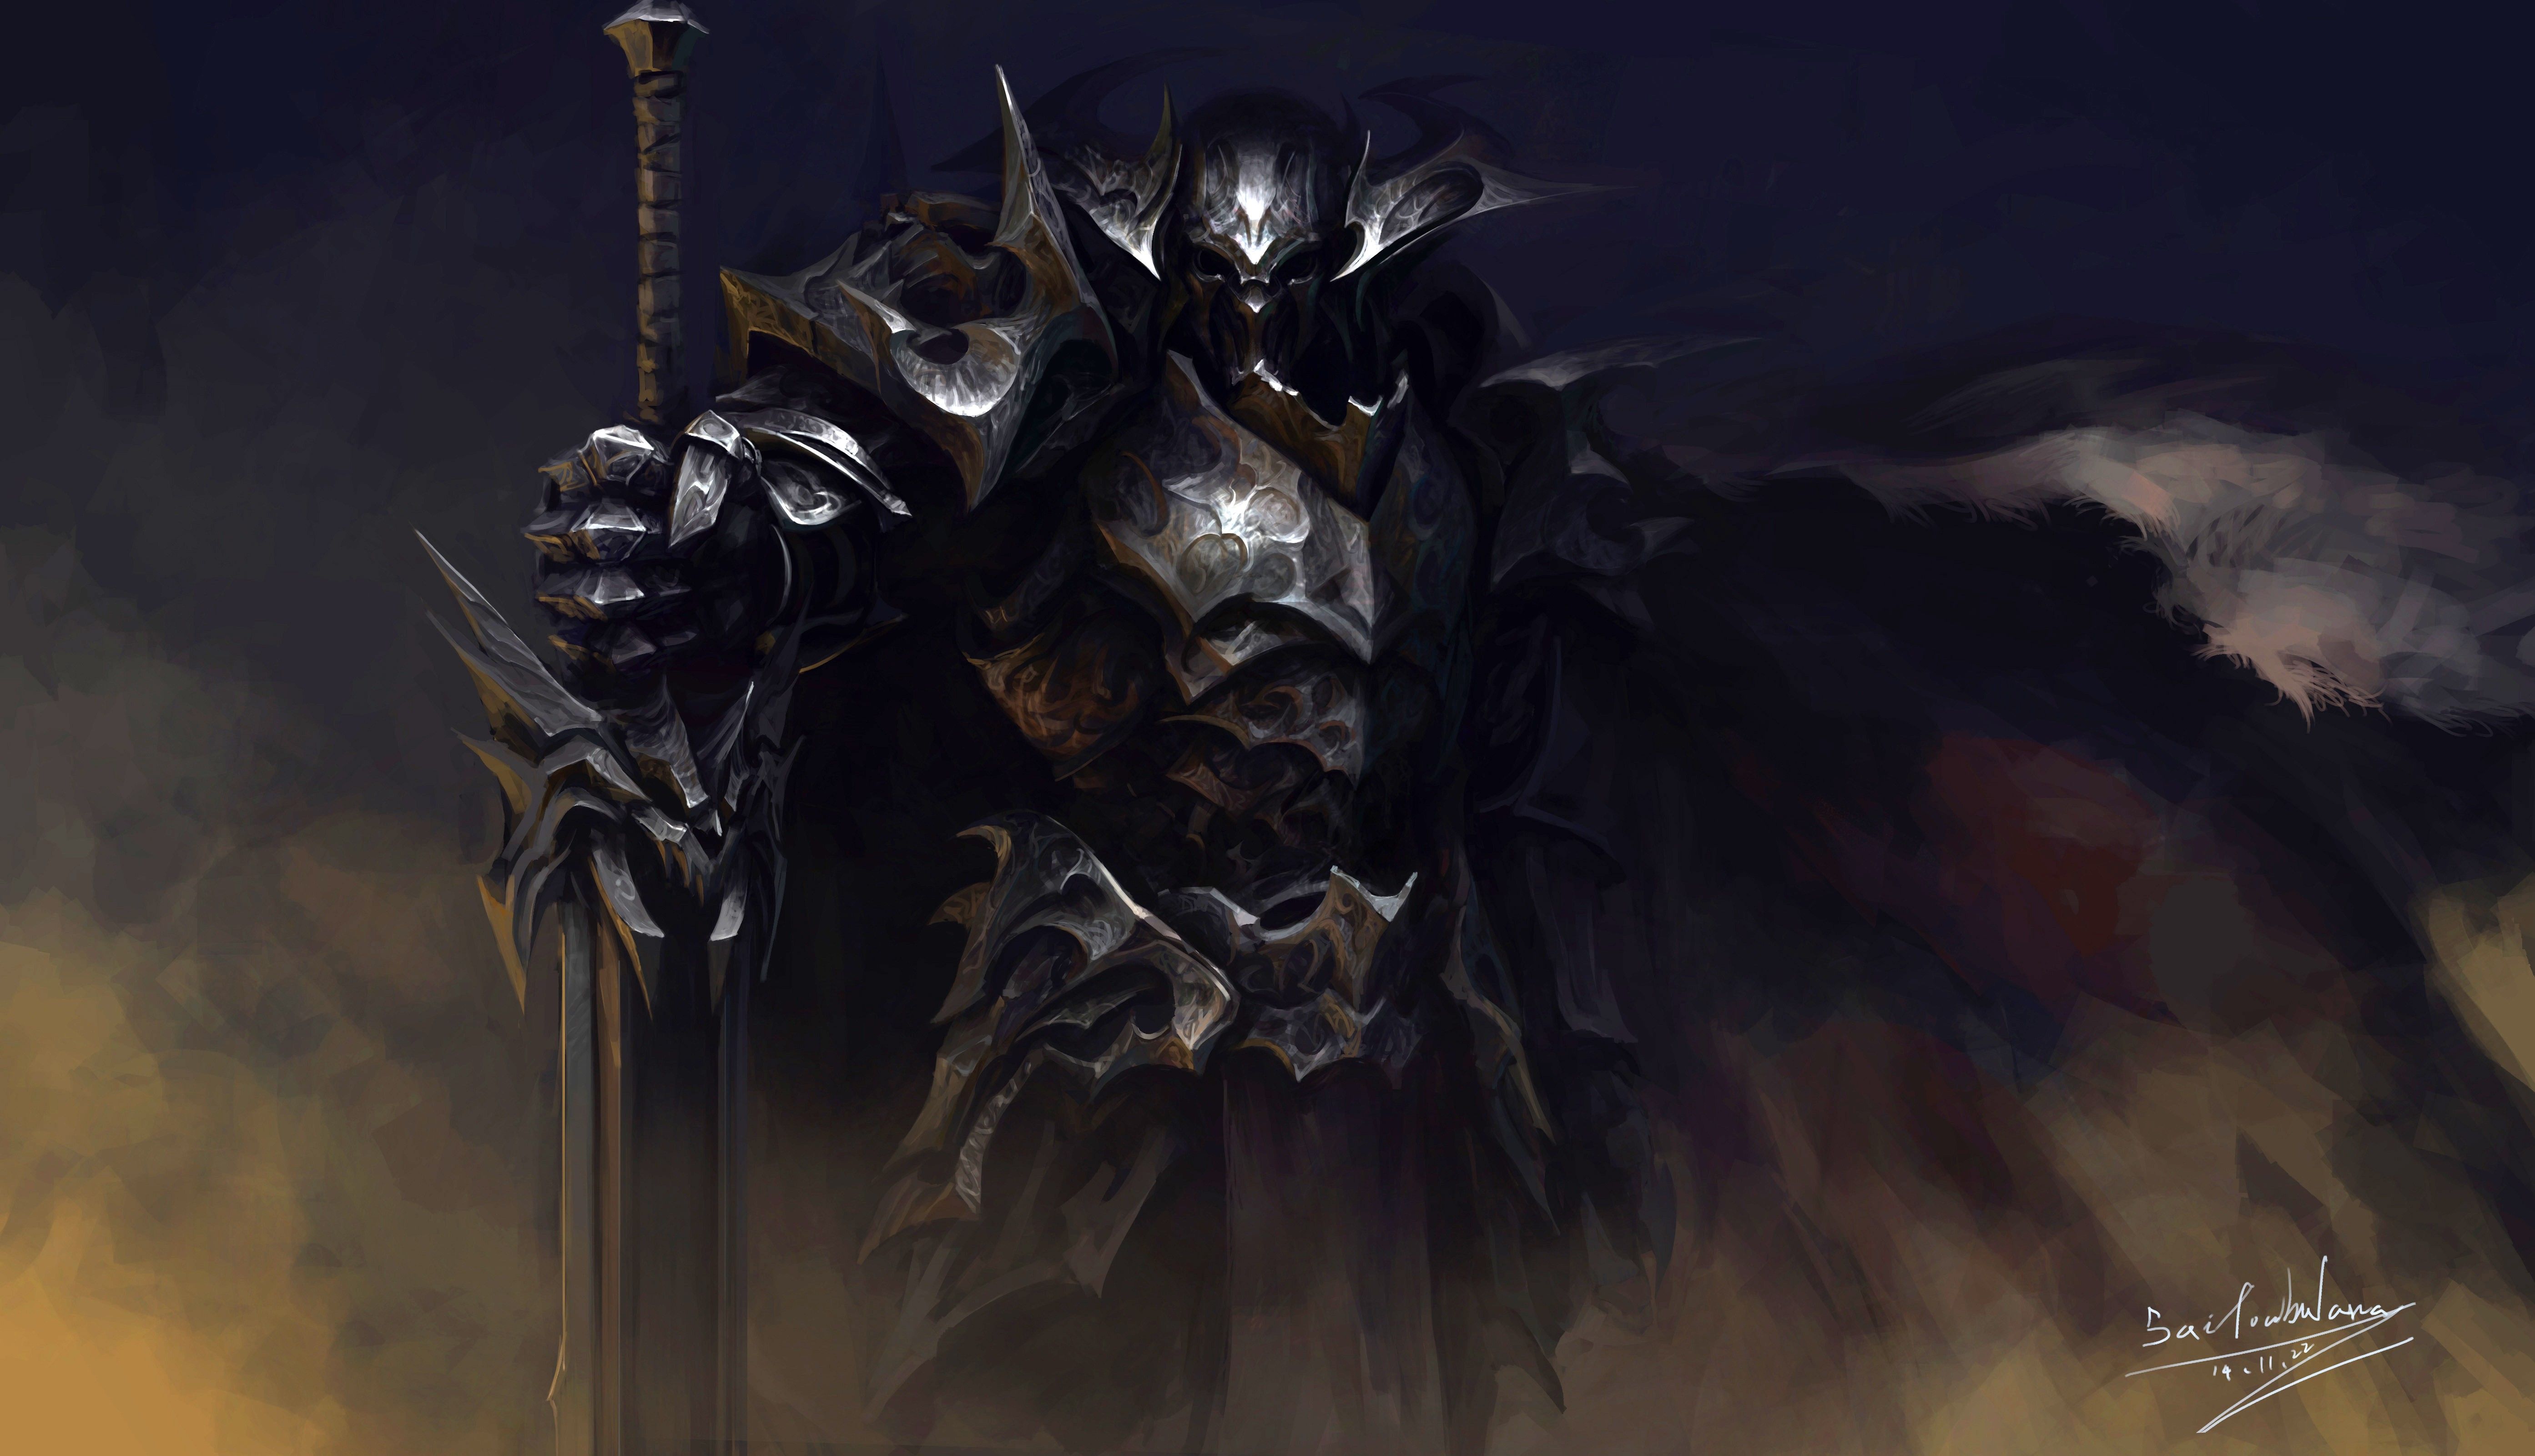 Wallpaper light, armor, Eclipse, Knight, spears for mobile and desktop,  section фантастика, resolution 1920x1080 - download